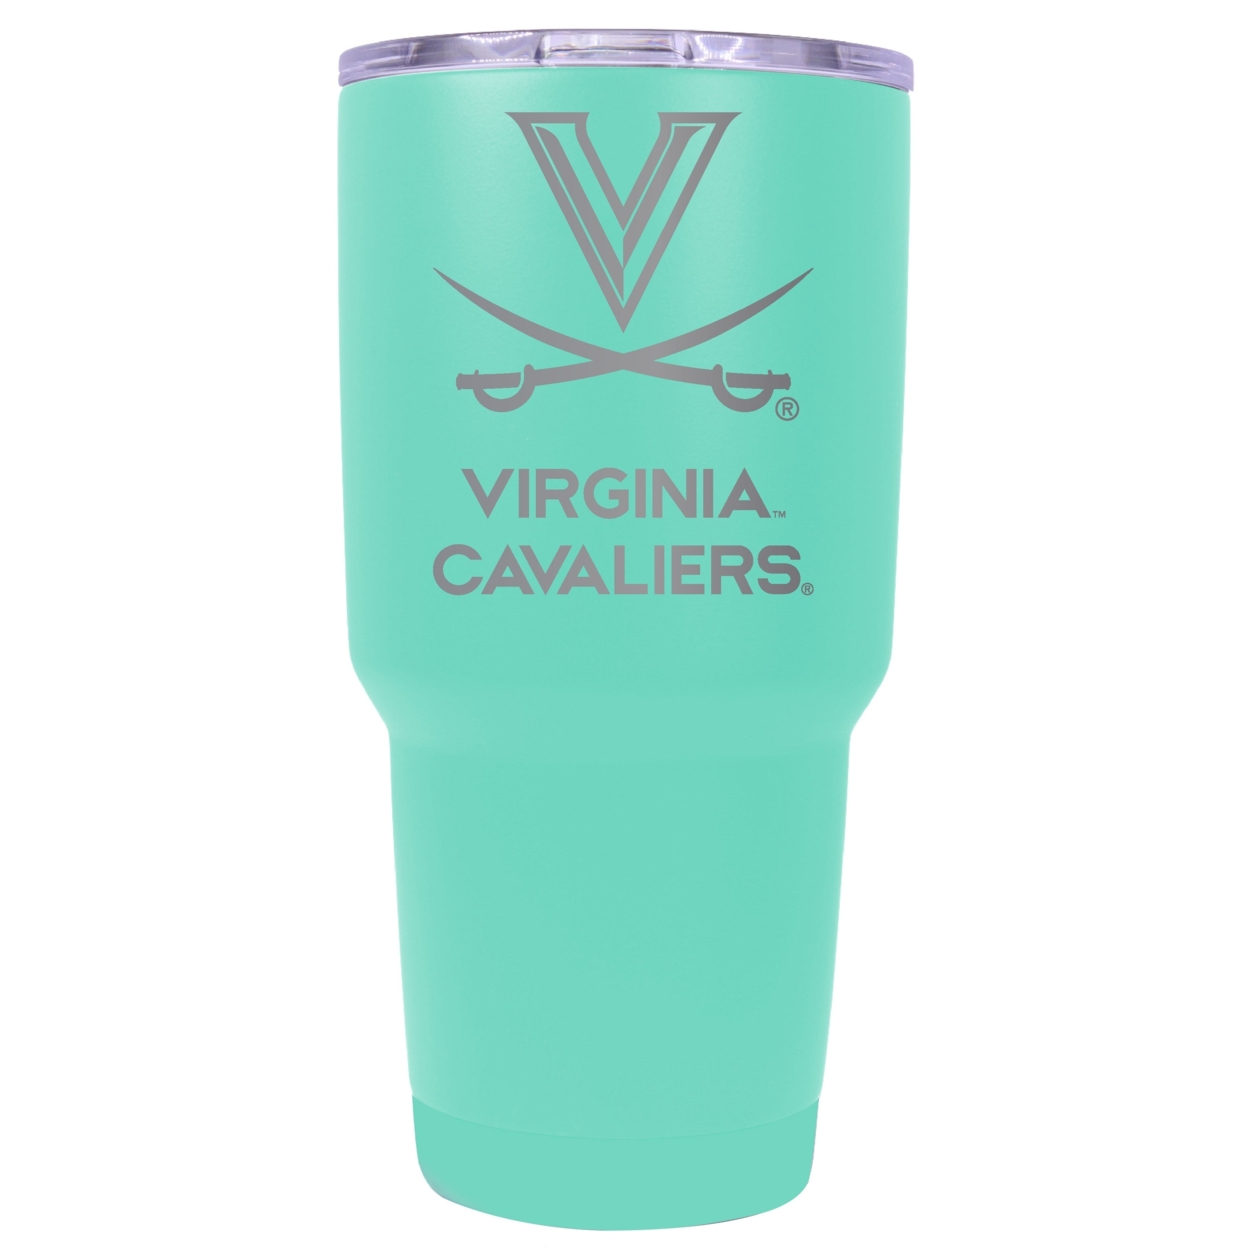 Virginia Cavaliers 24 Oz Laser Engraved Stainless Steel Insulated Tumbler - Choose Your Color. - Red